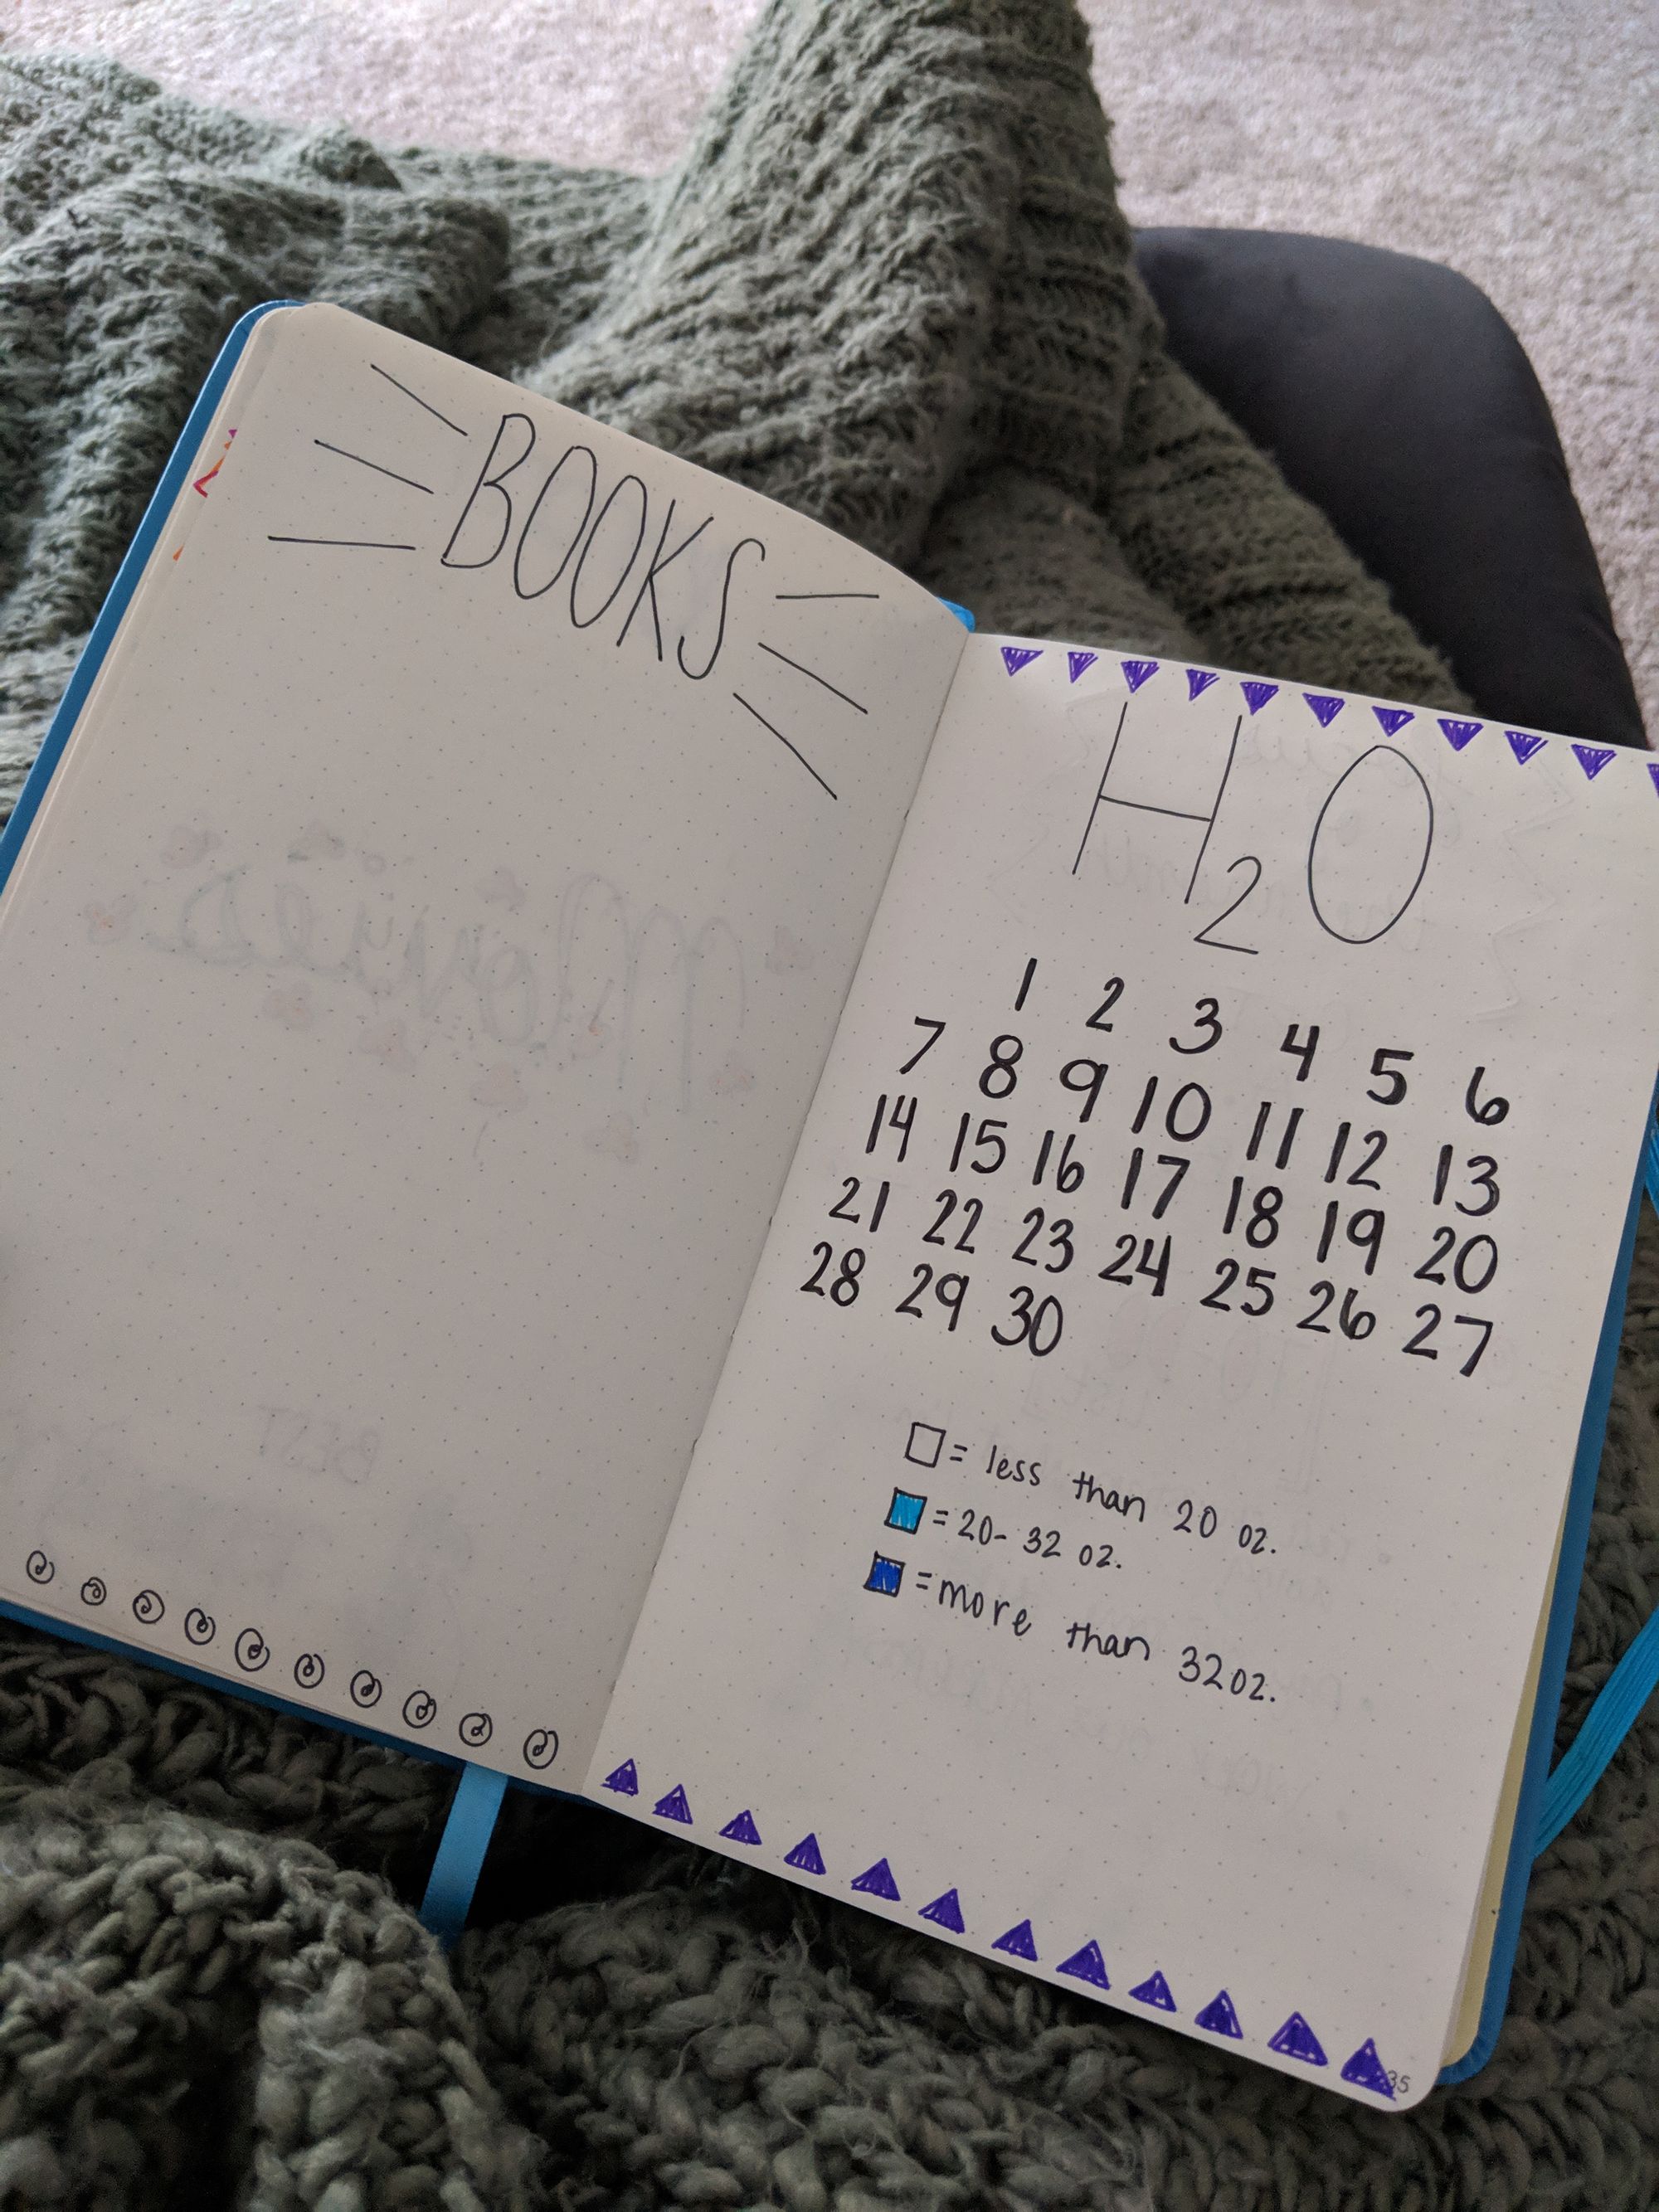 4 Months Into Bullet Journaling...